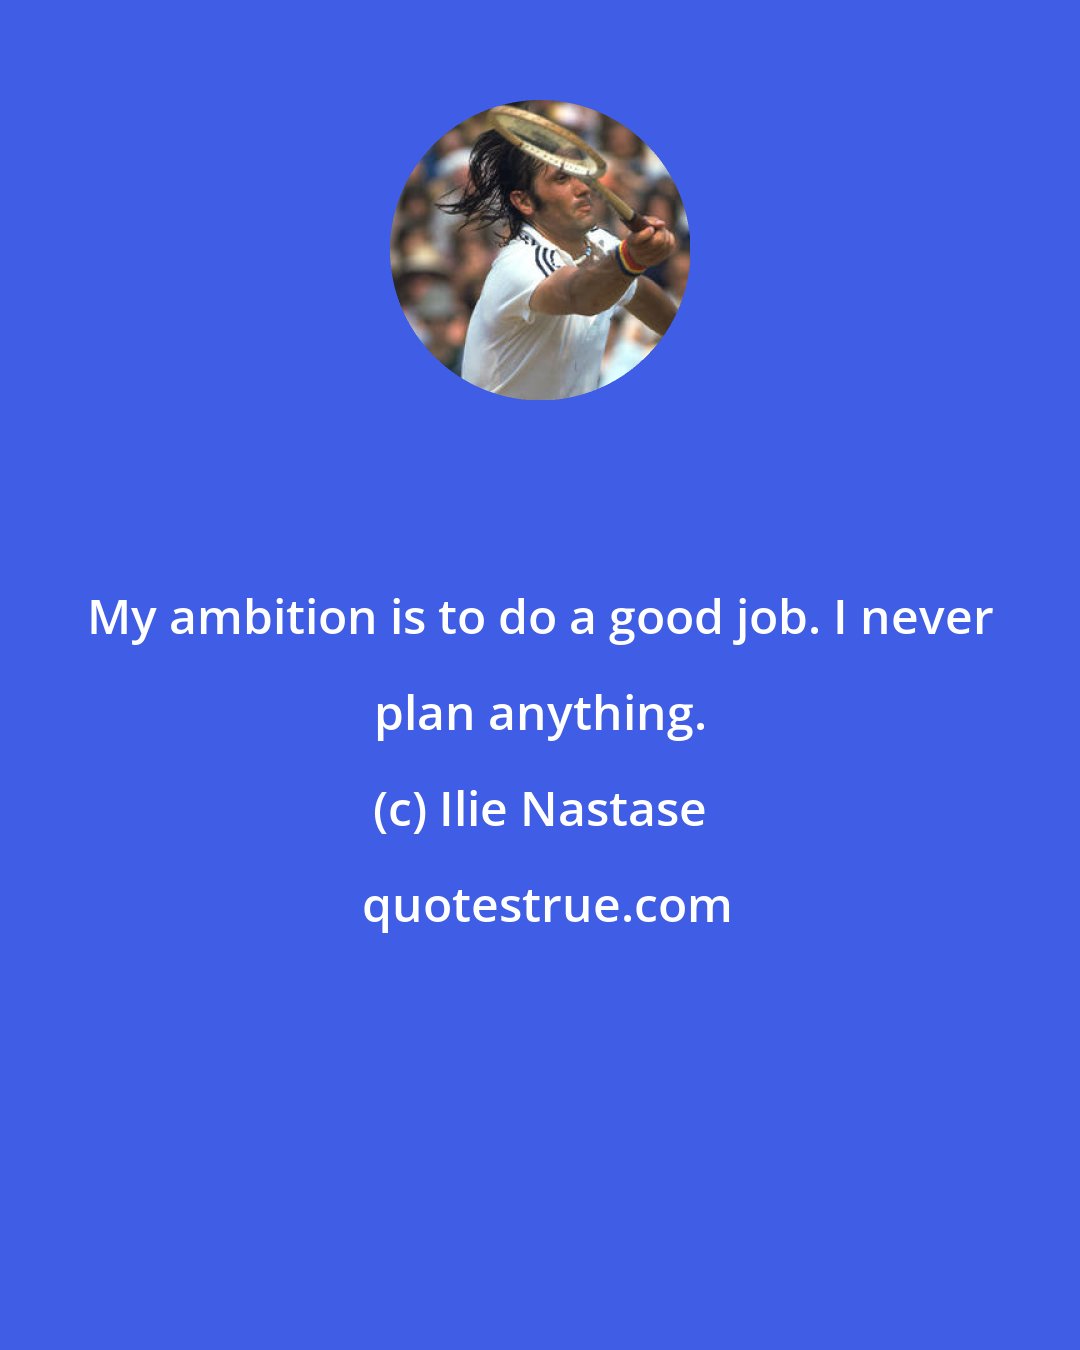 Ilie Nastase: My ambition is to do a good job. I never plan anything.